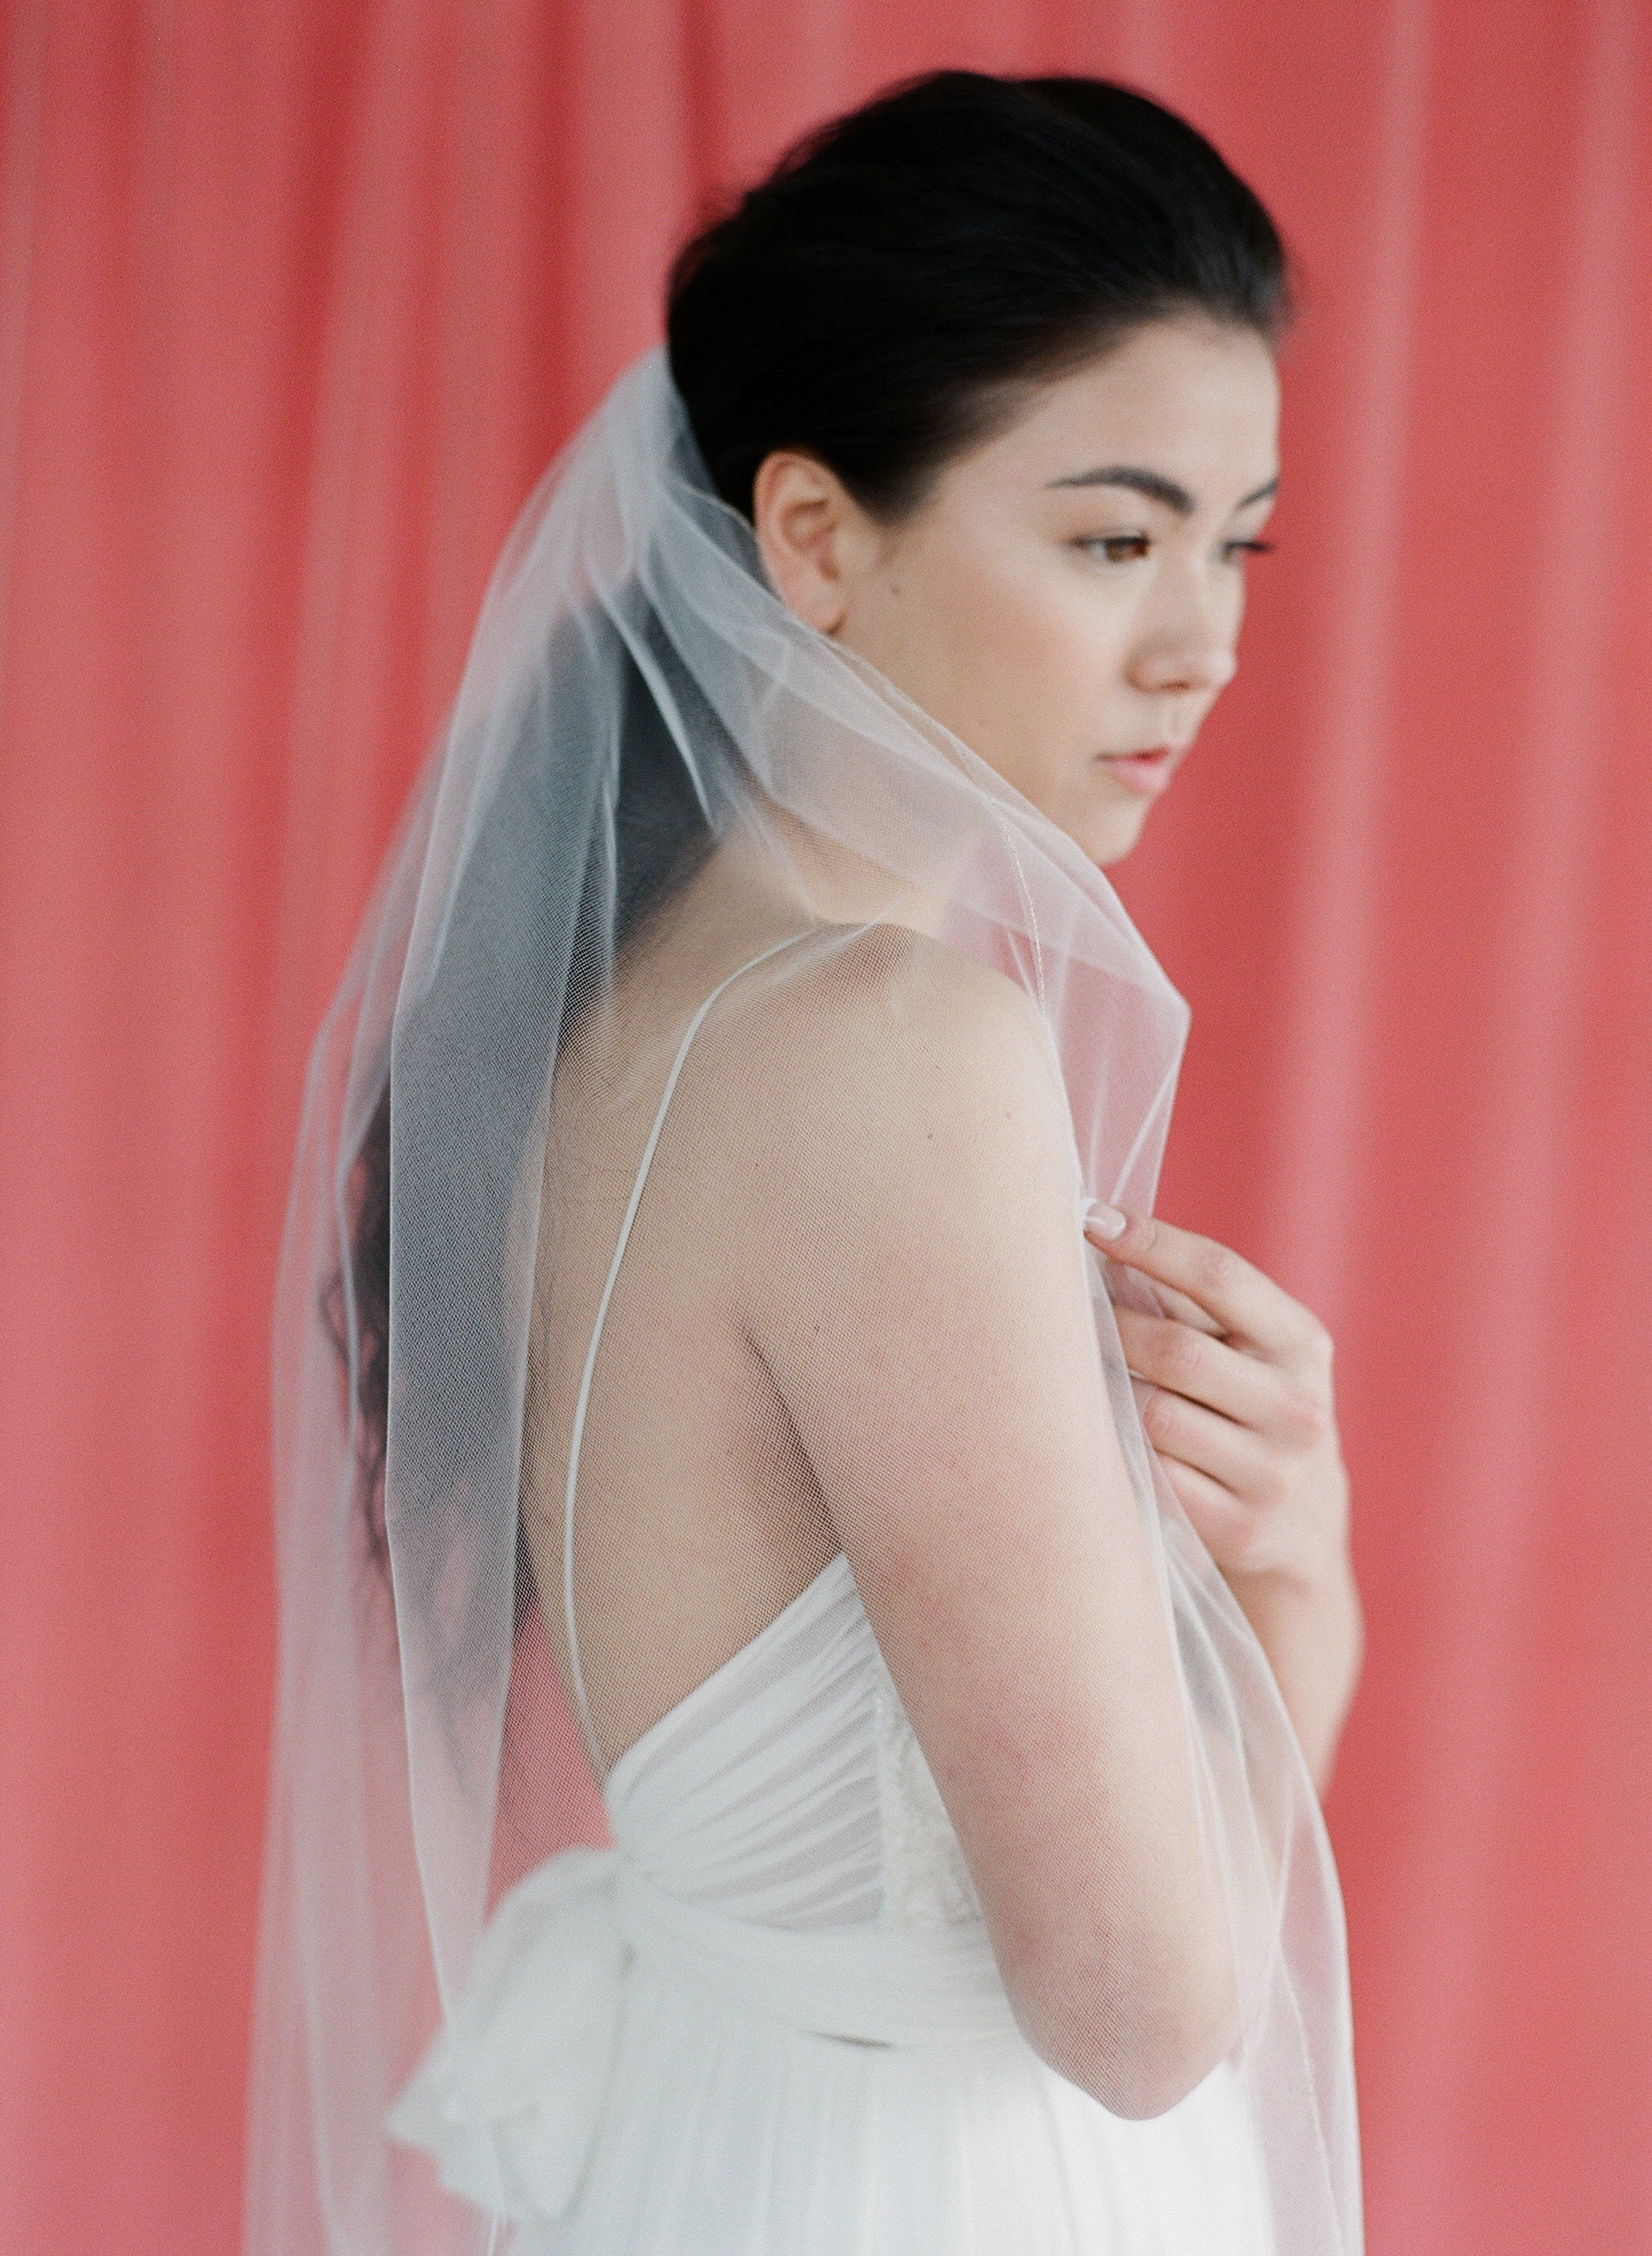 simple classic tulle veil with a subtle gold or silver metallic trim